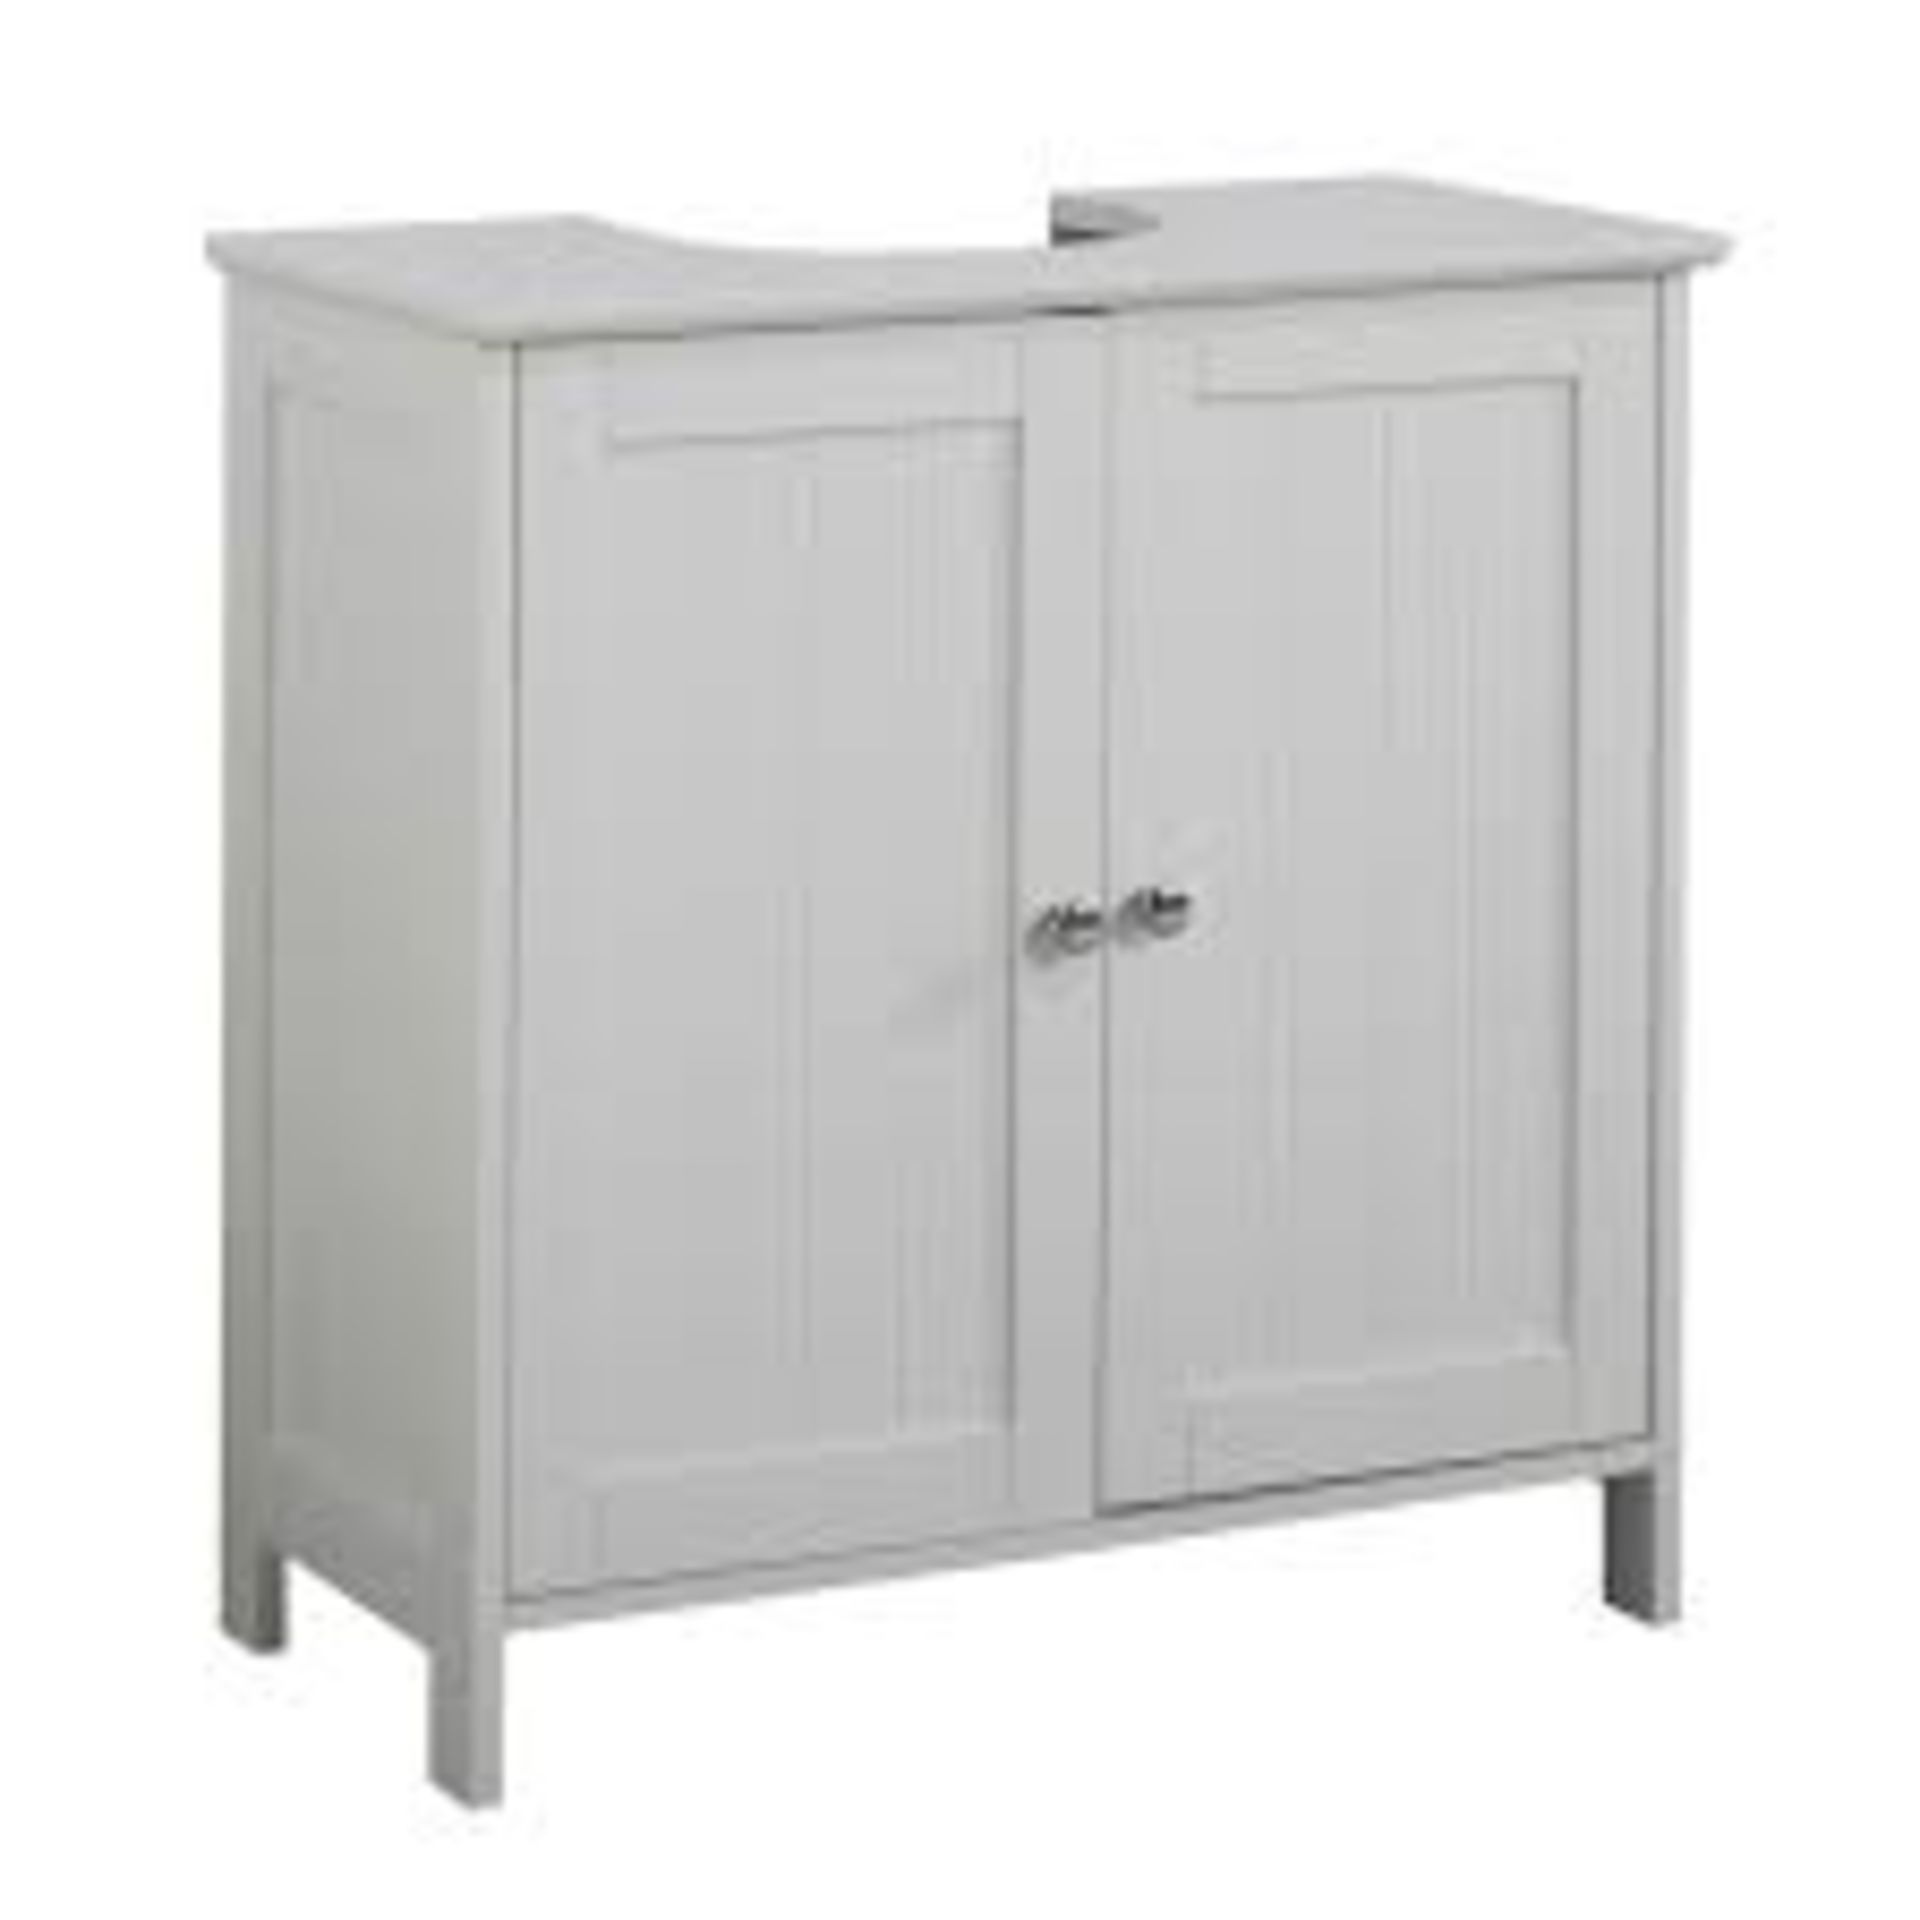 Ashby White Tongue & Groove Bathroom Under Sink Cabinet. - SR3. Utilise unused space around your